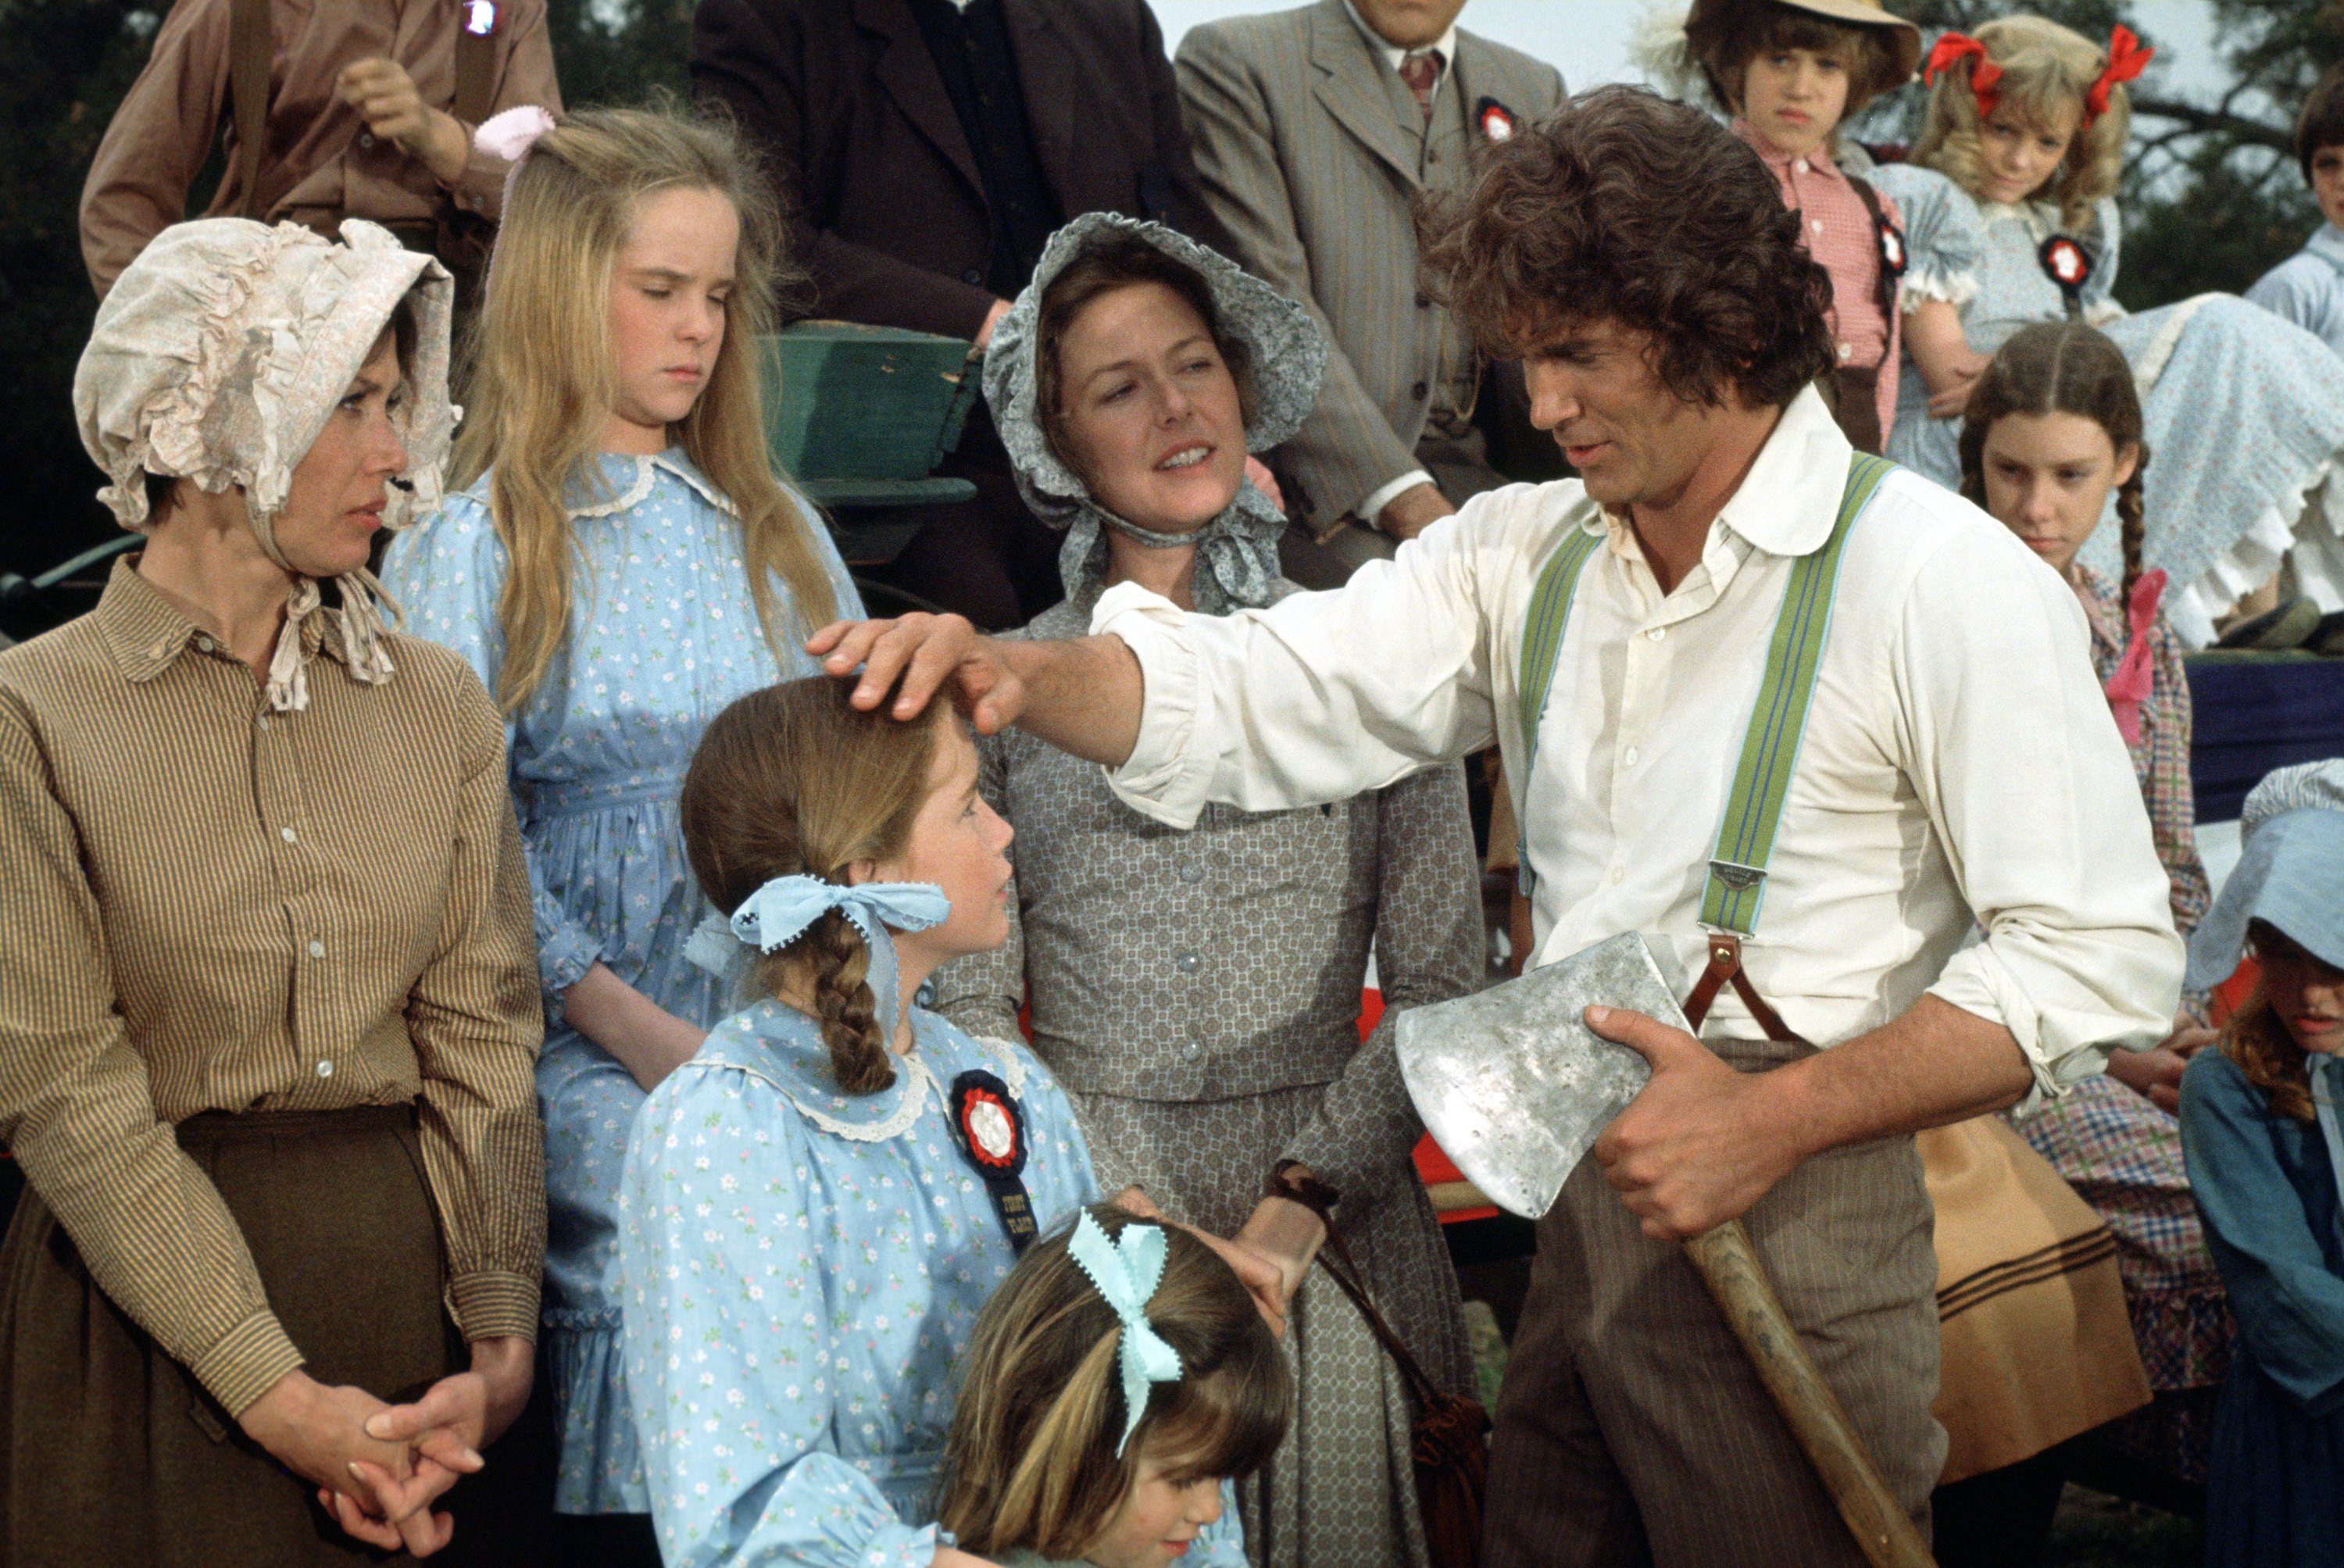 Michael Landon, right, on the set of 'Little House' with cast, 1975